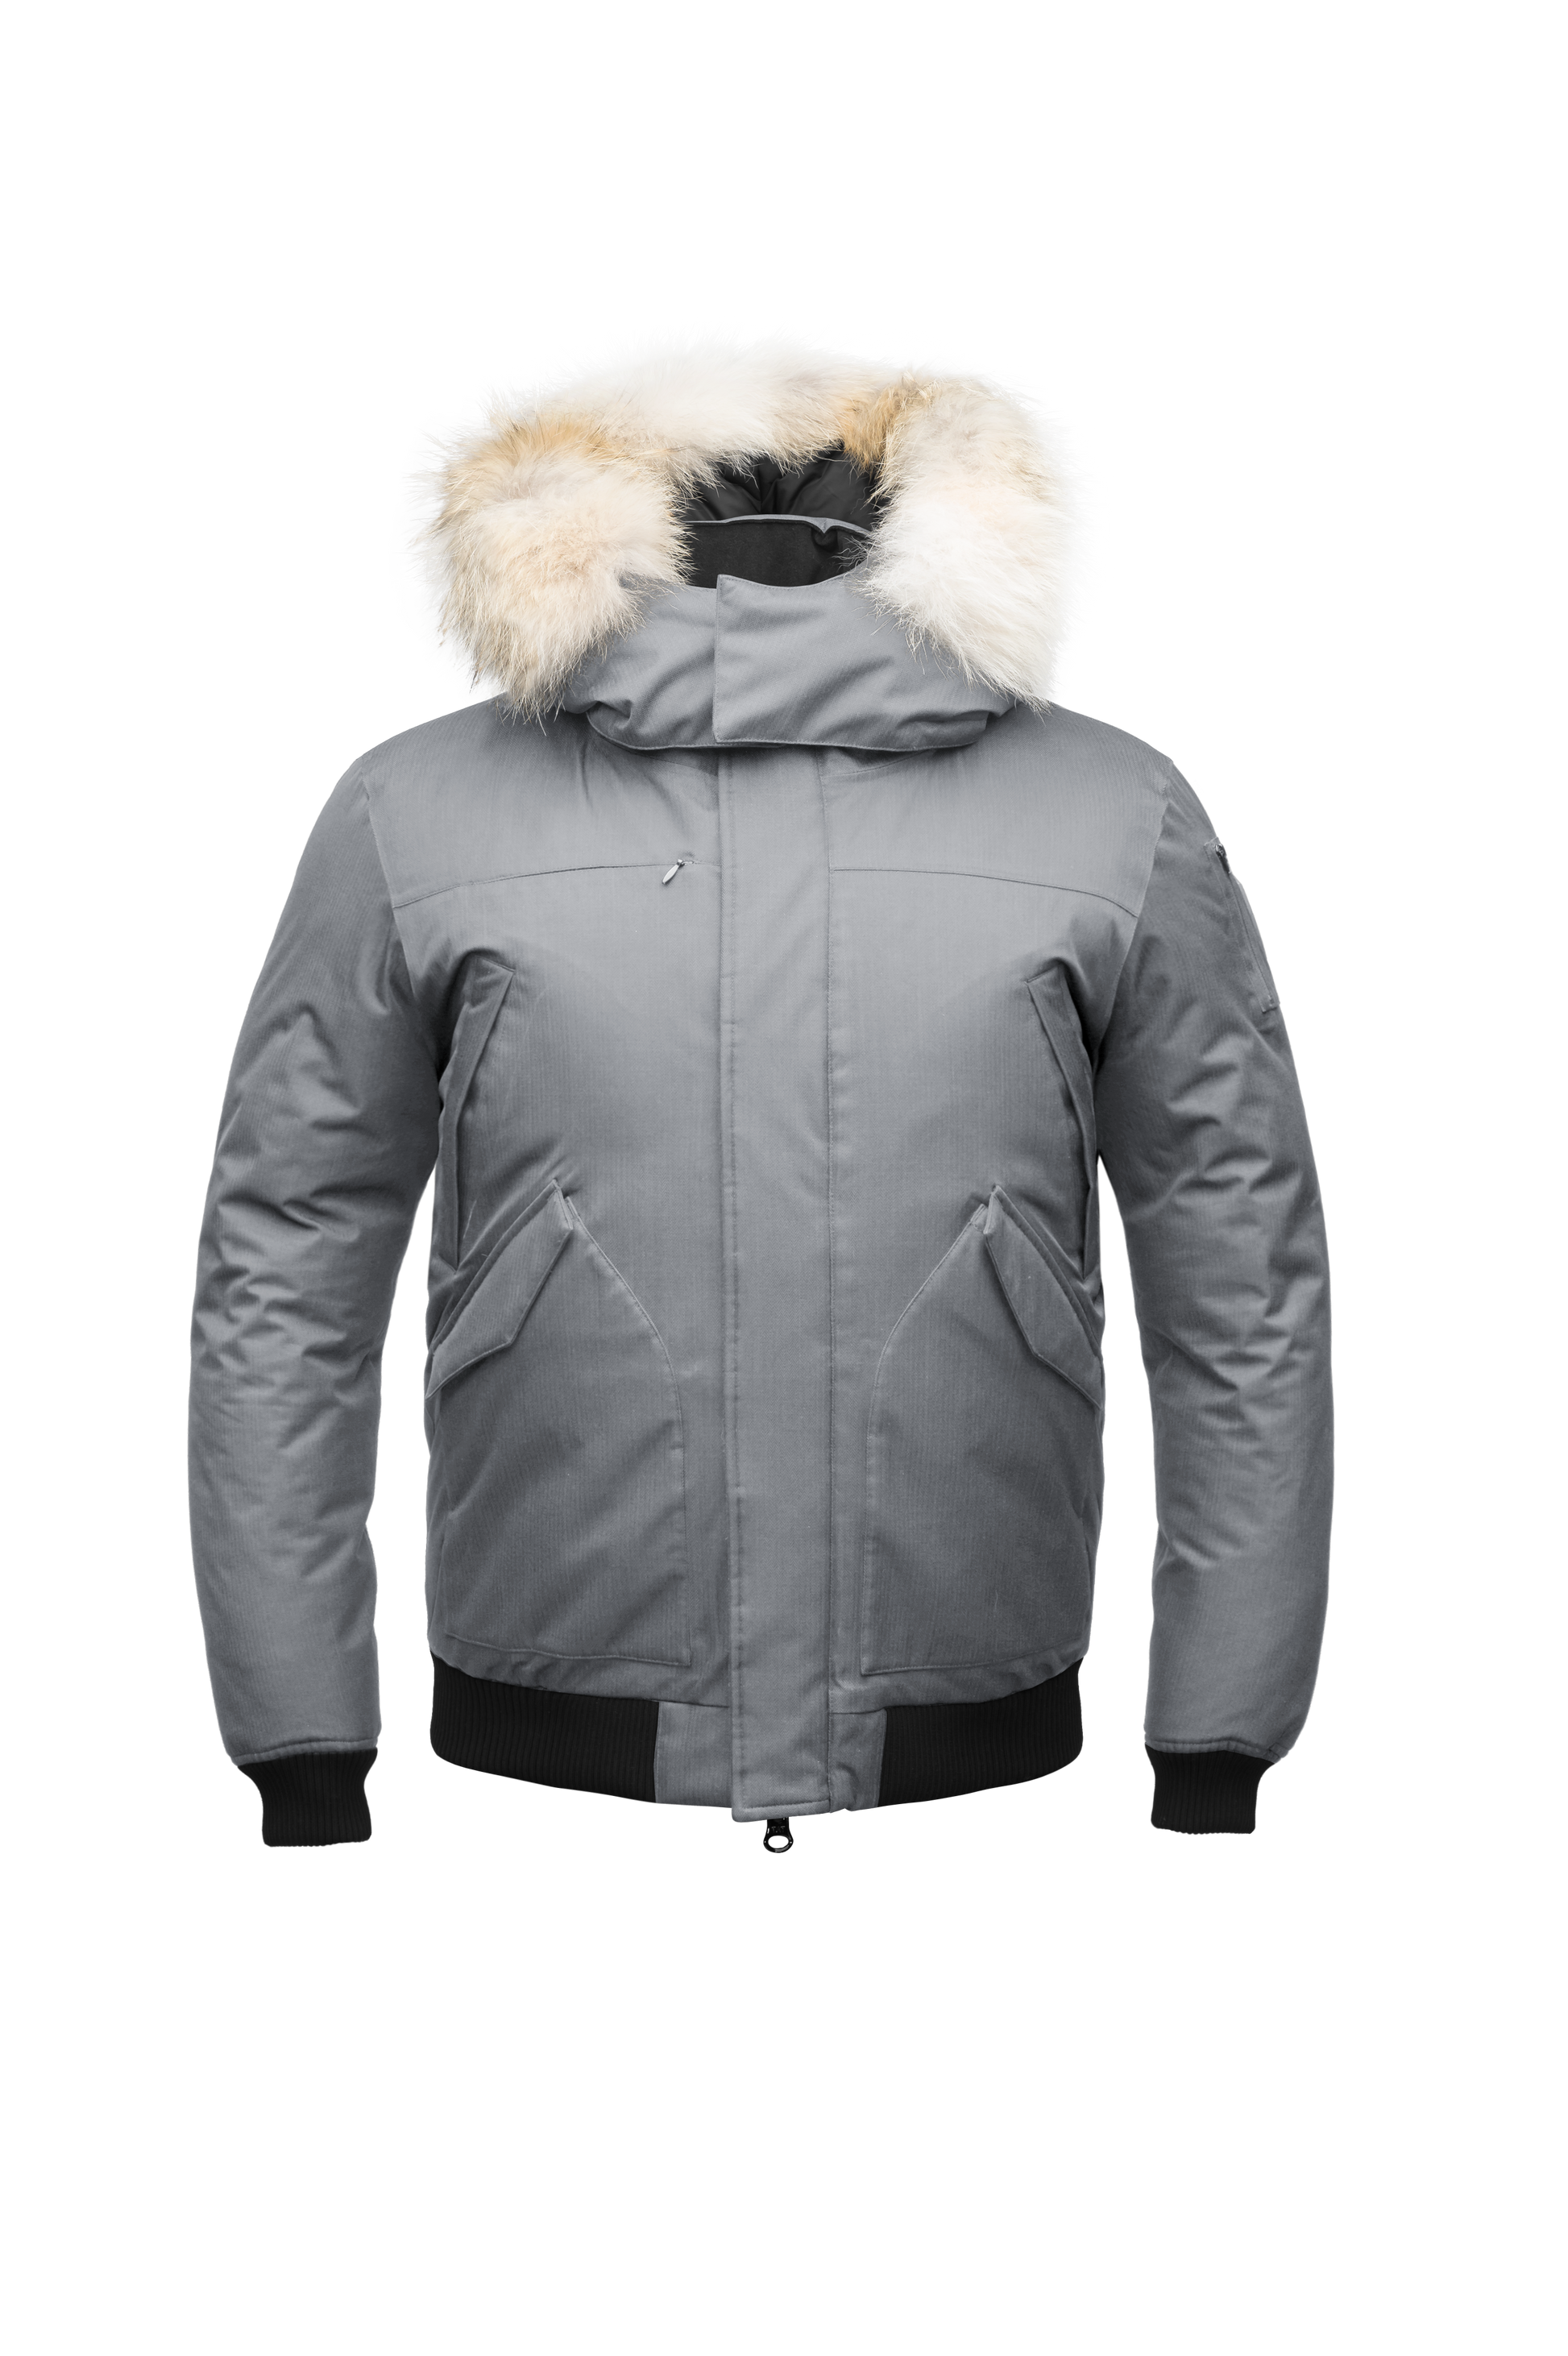 Men's classic down filled bomber jacket with a down filled hood that features a removable coyote fur trim and concealed moldable framing wire in Concrete